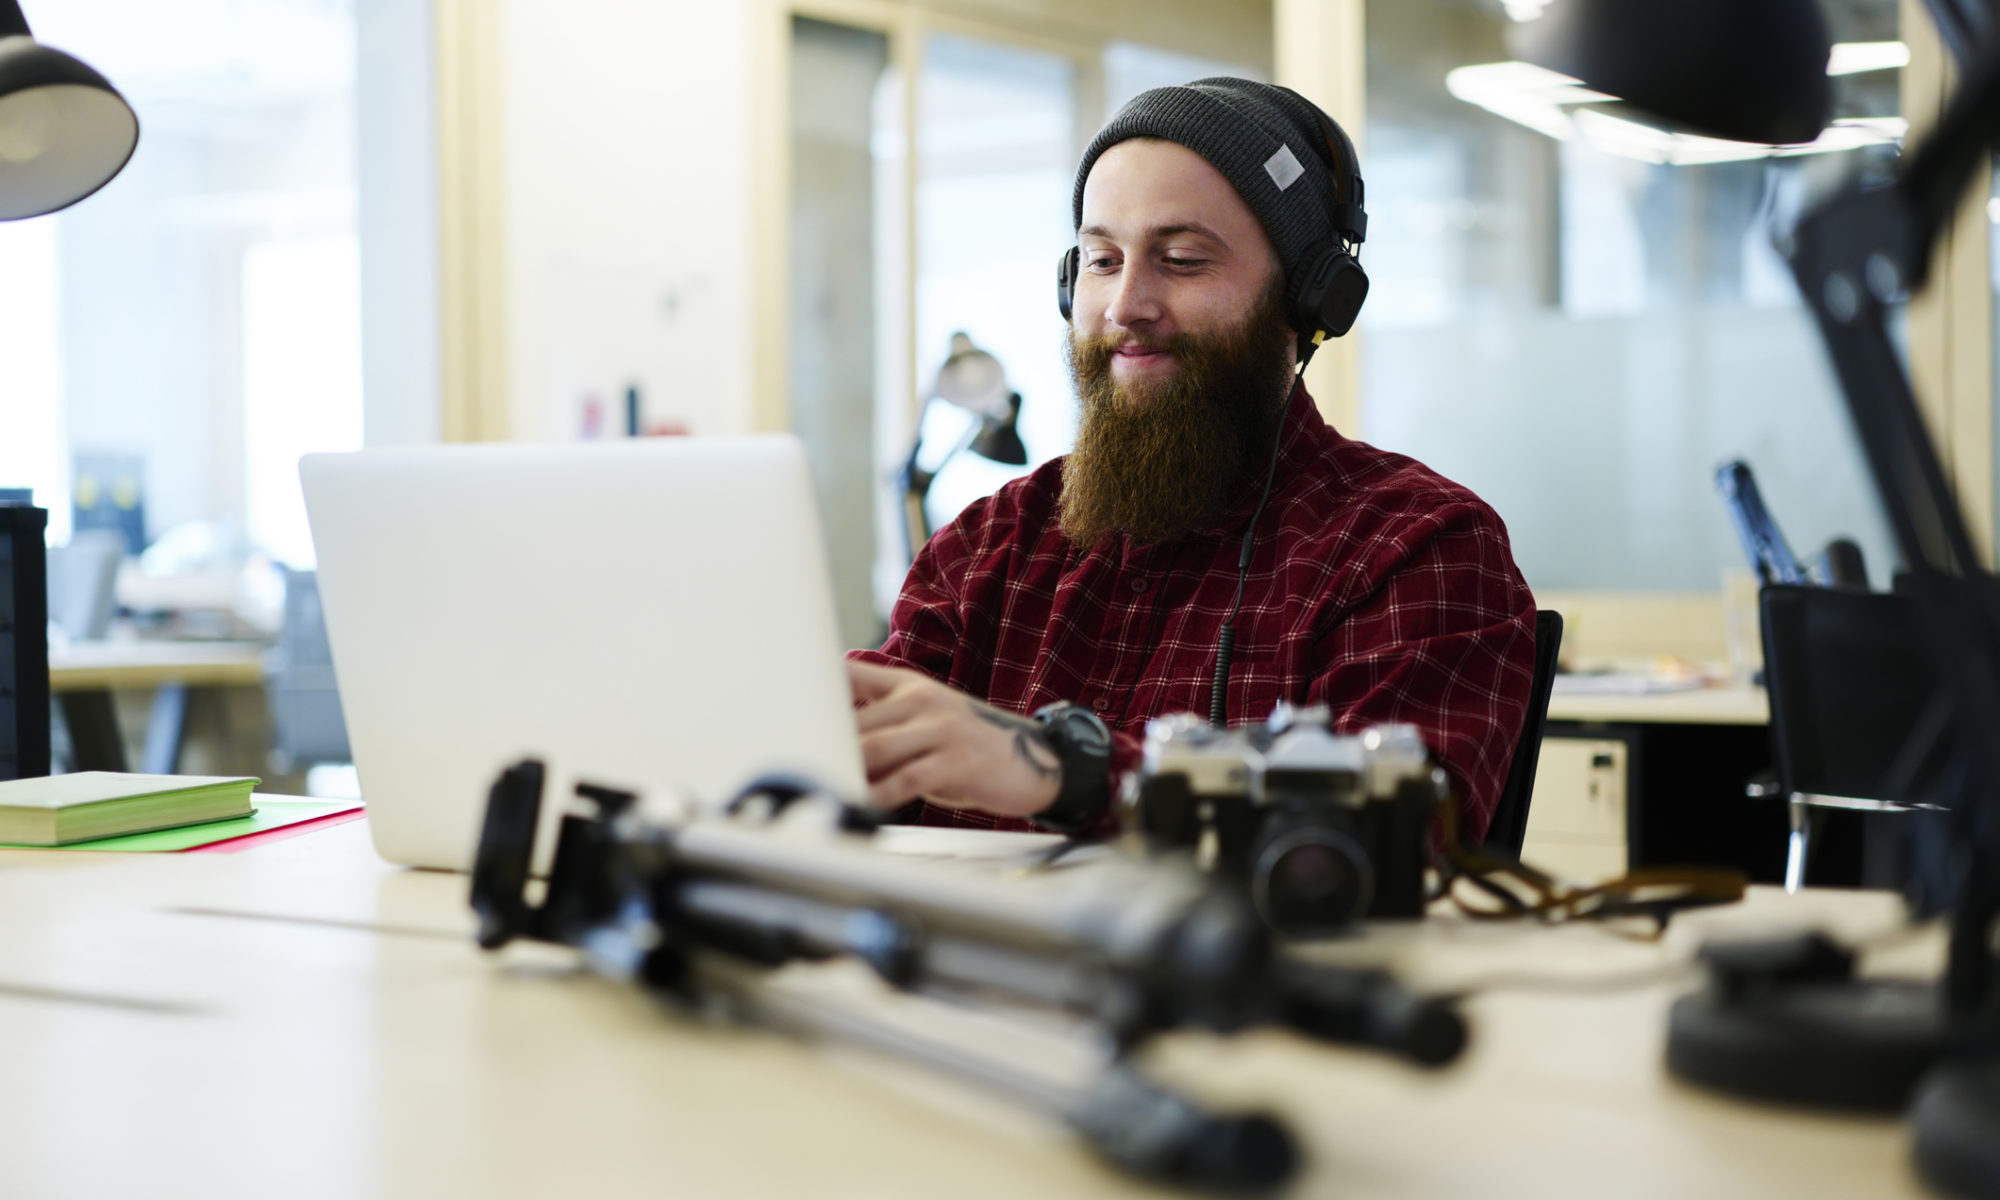 Caucasian male with a long beard is sat at a desk in front of a laptop editing photos with camera equipment surrounding the laptop